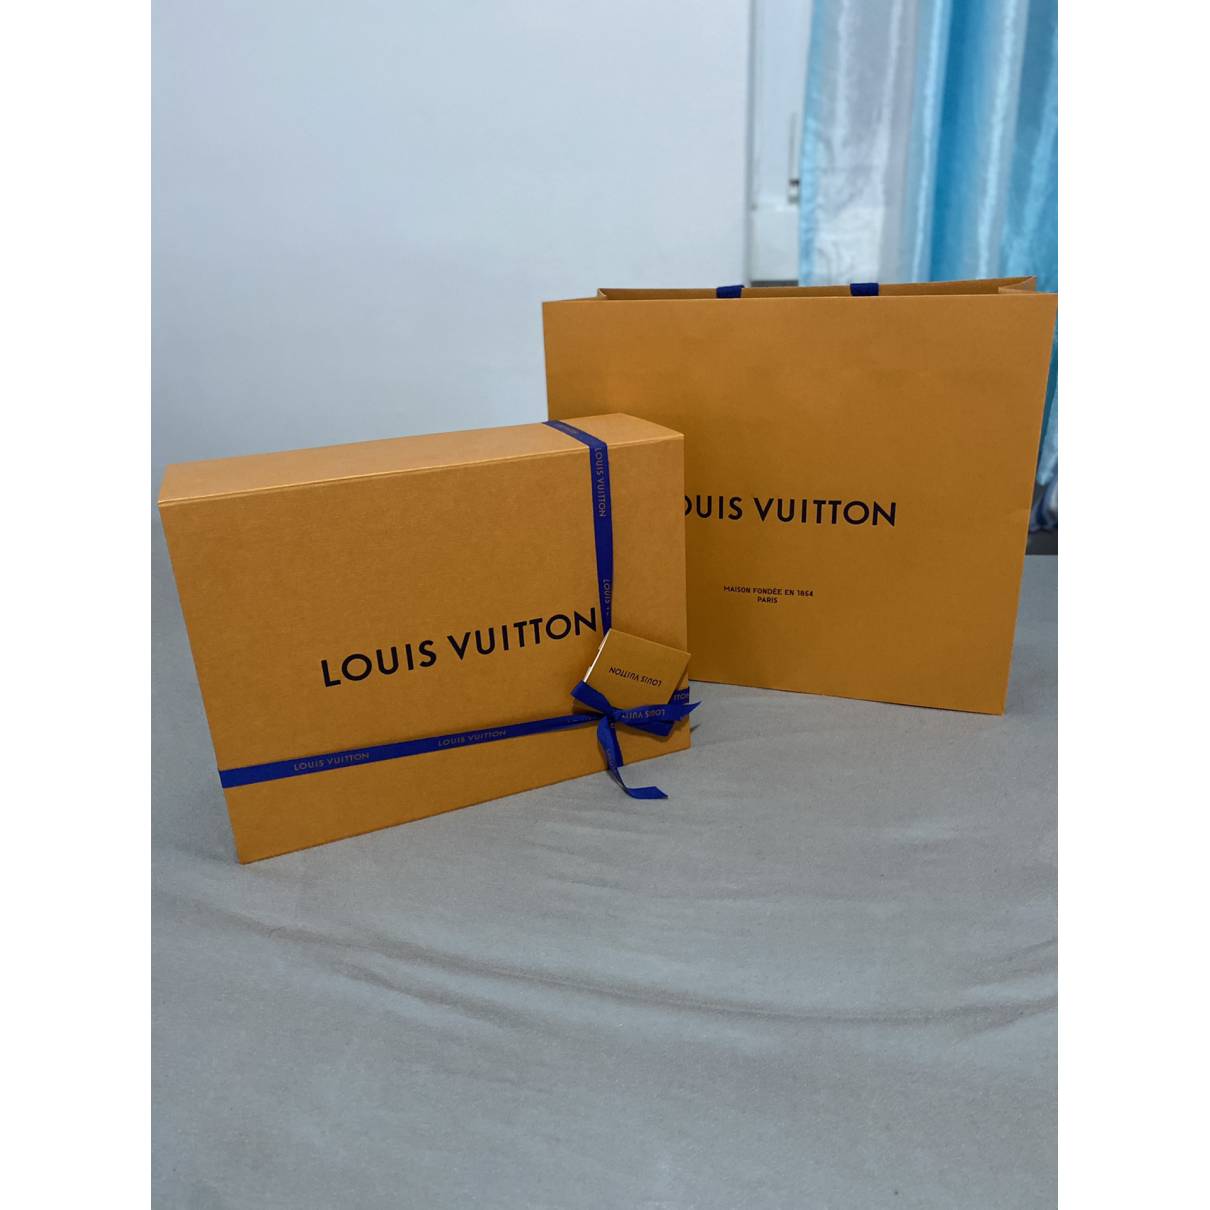 louis vuitton gift box and bag